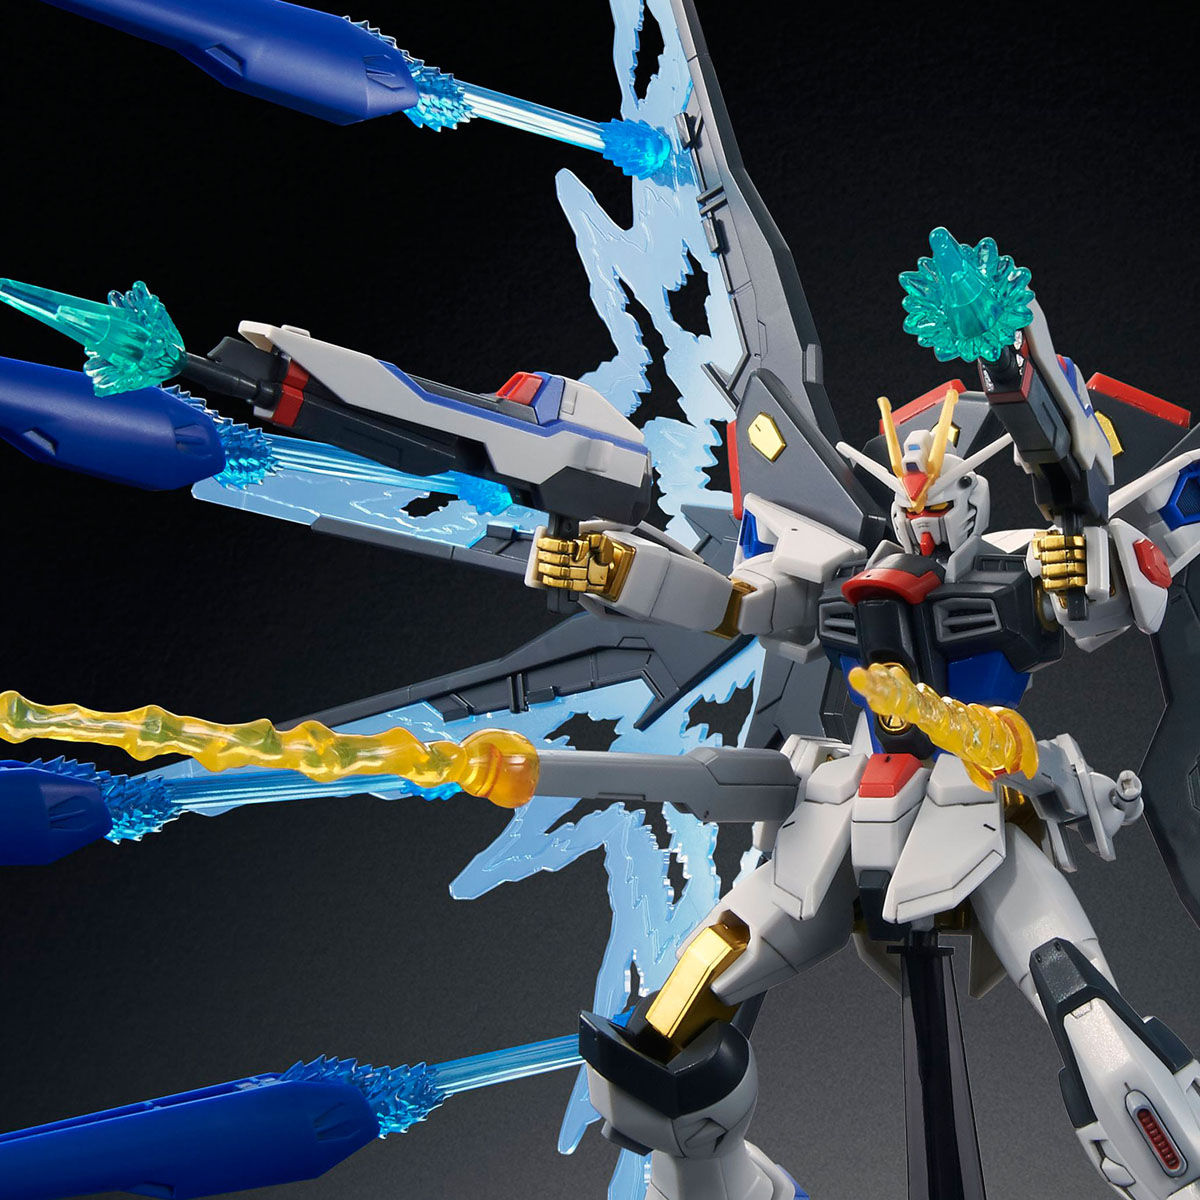 HGCE-Revive- 1/144 ZGMF-X20A Strike Freedom Gundam Wing of Light DX Edition